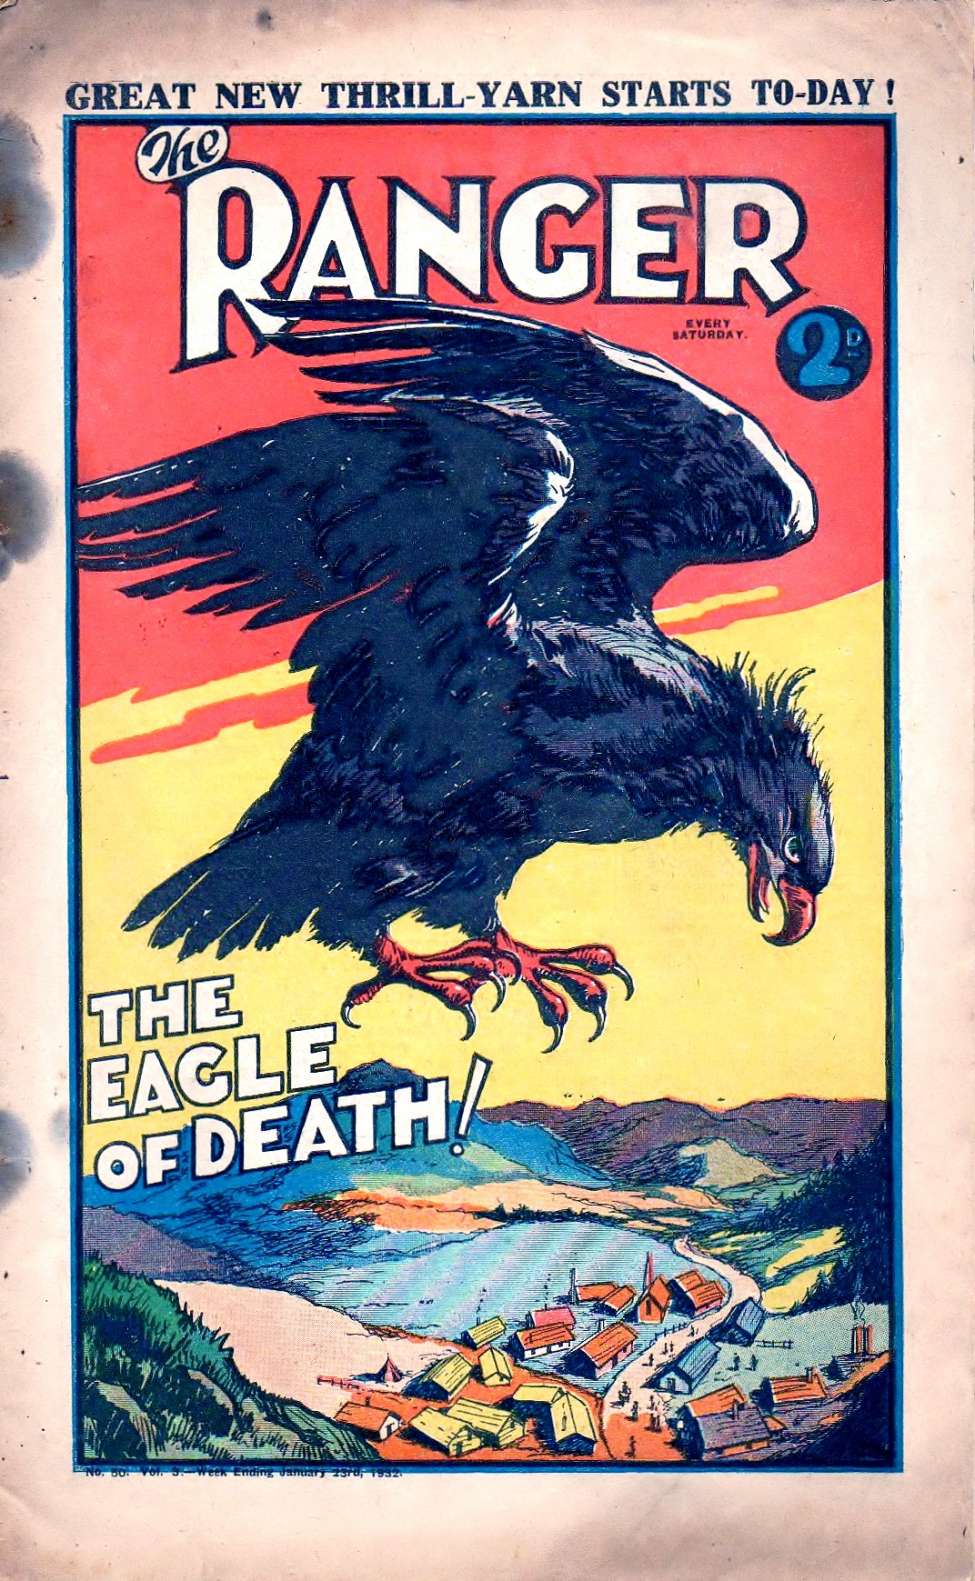 Comic Book Cover For Ranger 50 - The Eagle of Death!